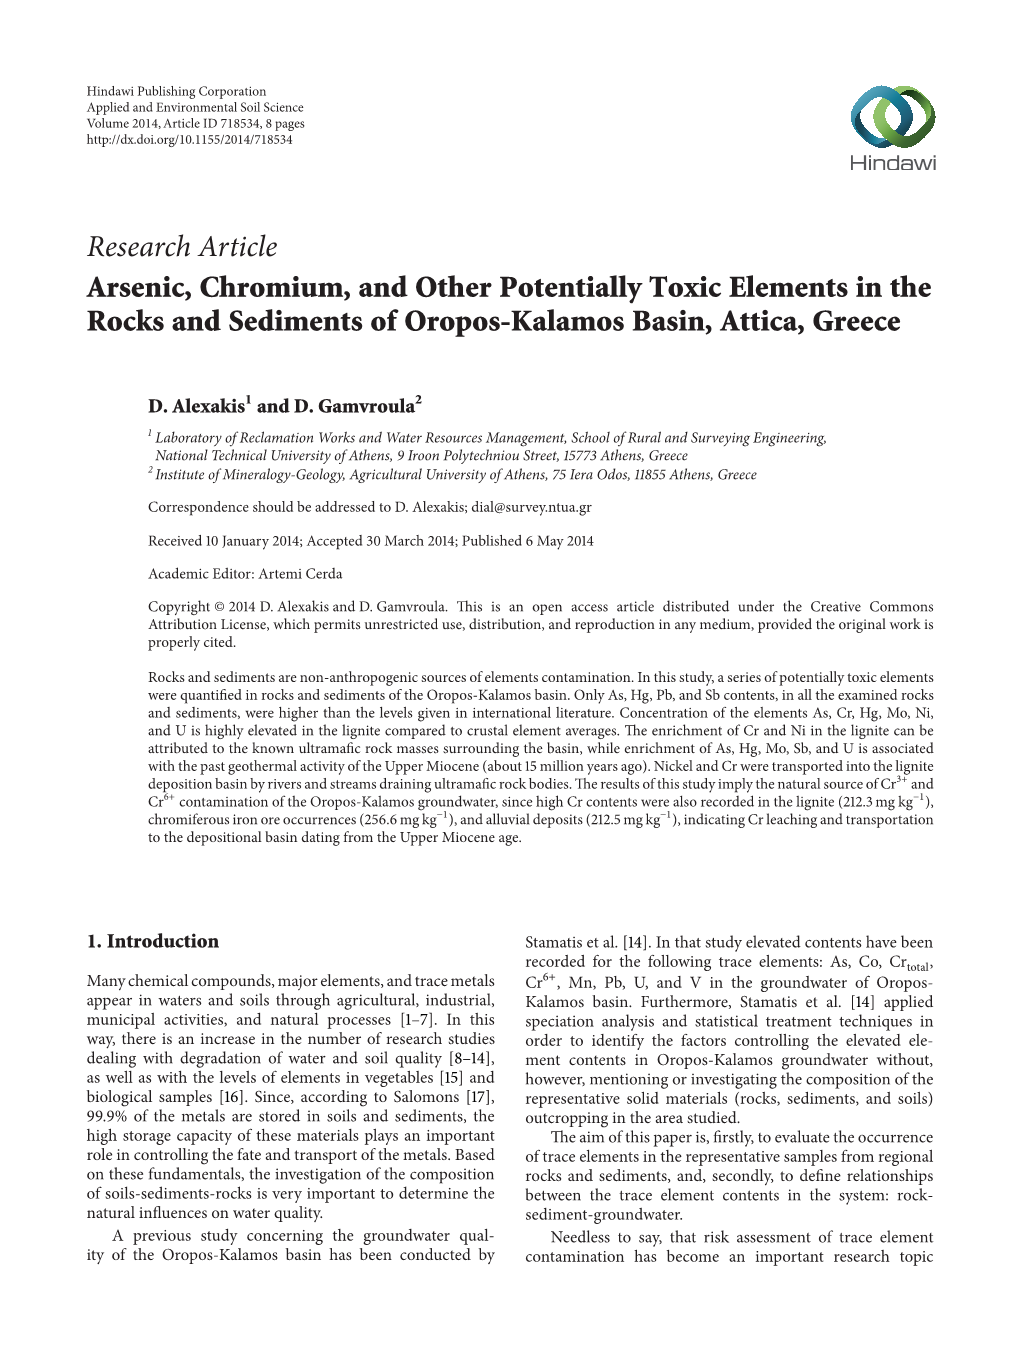 Arsenic, Chromium, and Other Potentially Toxic Elements in the Rocks and Sediments of Oropos-Kalamos Basin, Attica, Greece